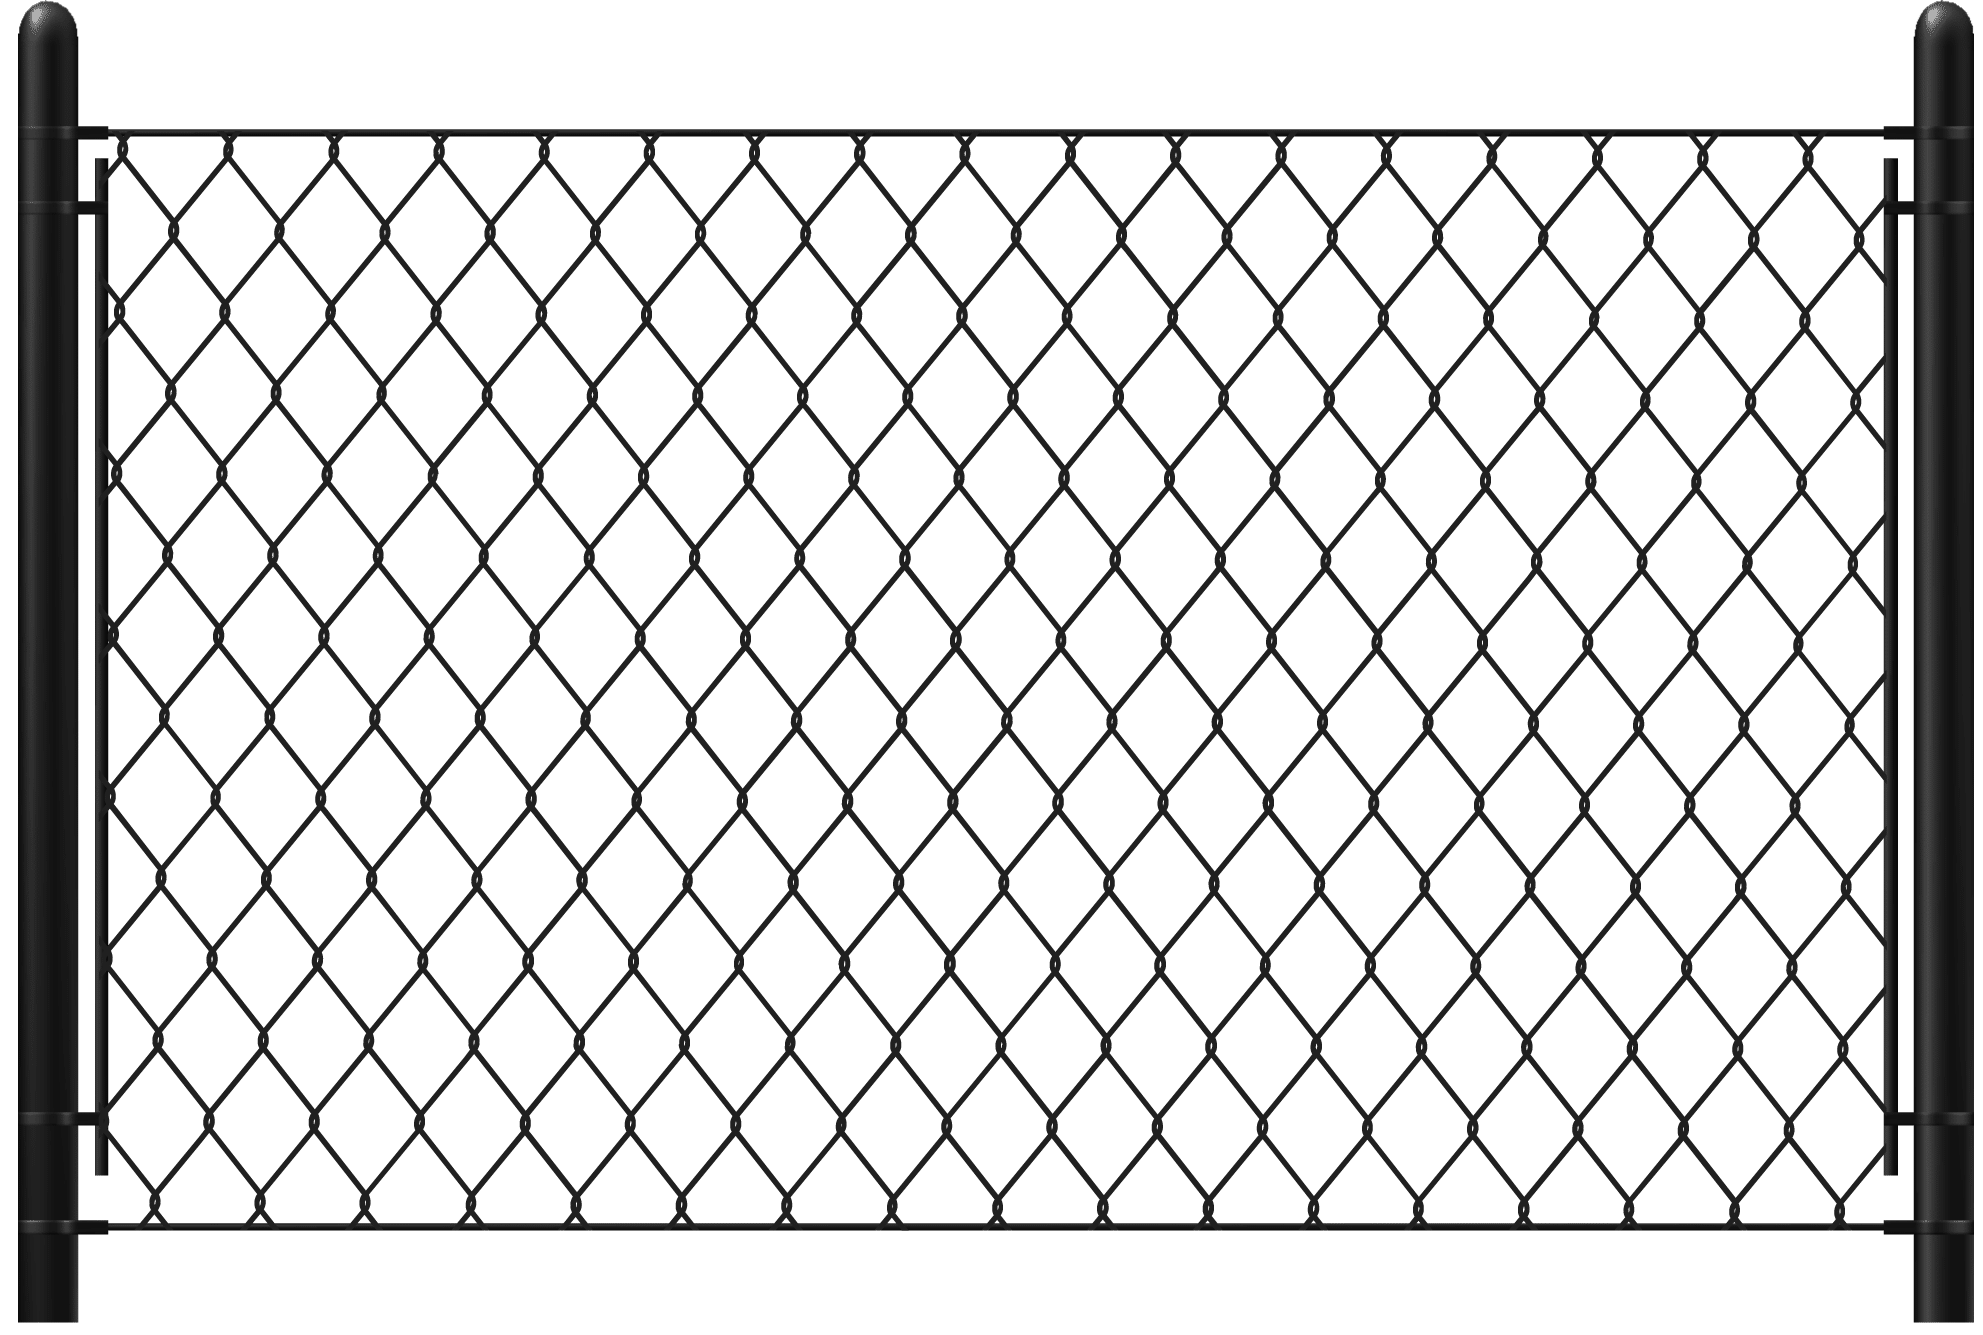 Chainlink fence in south Florida